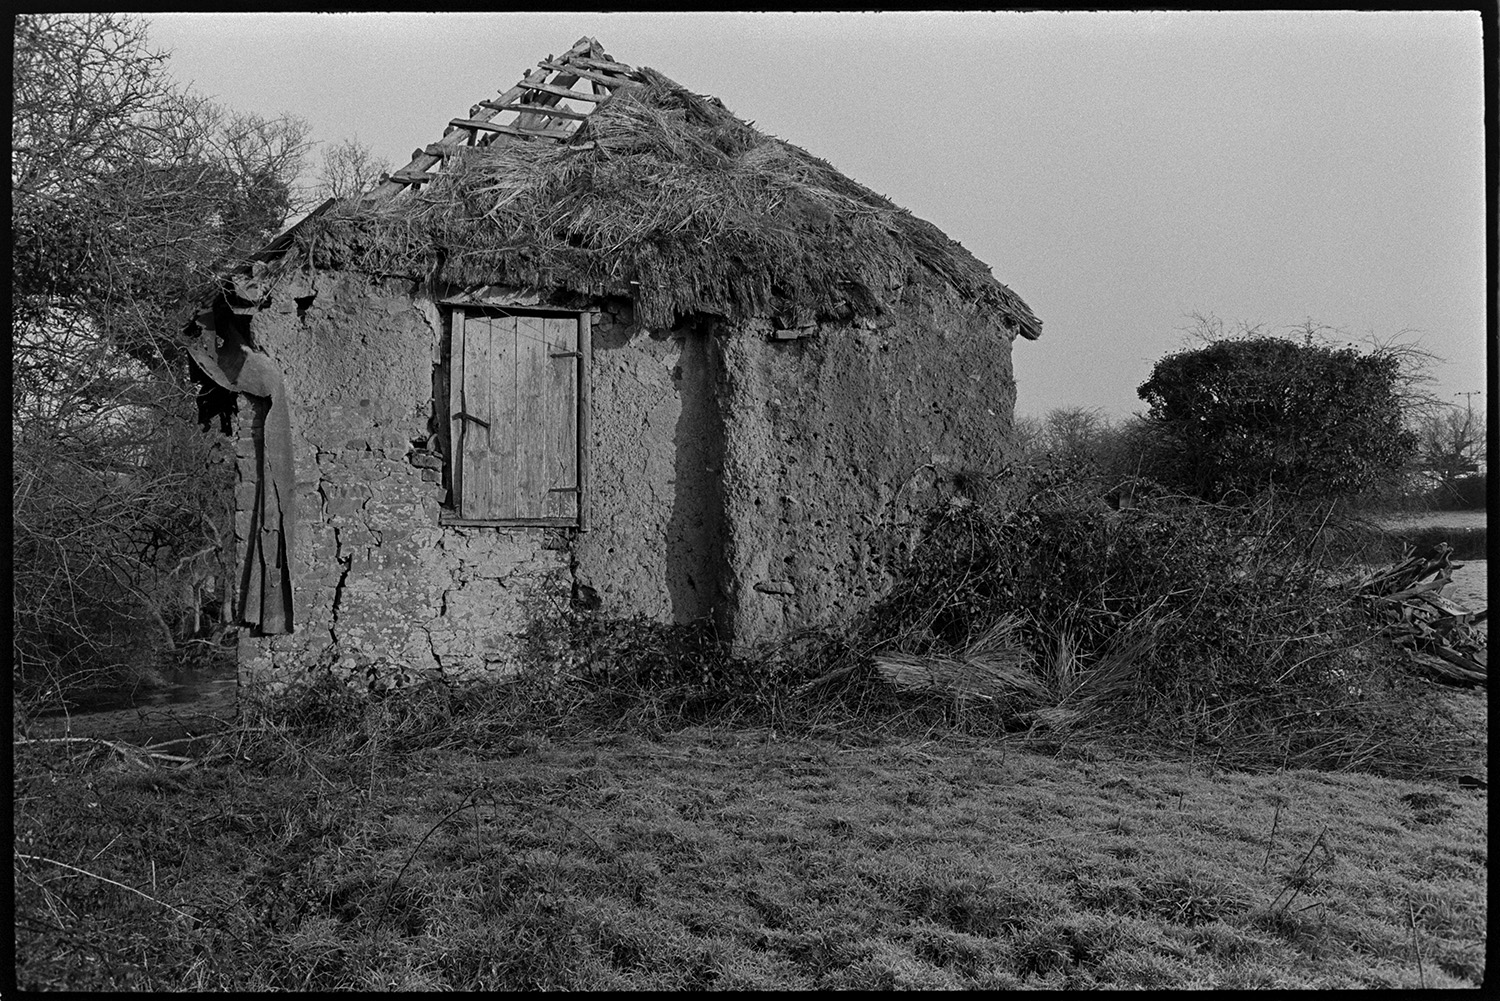 Ruined thatch and cob barns, with views from nearby stream, trees.
[A ruined thatch and cob barn, with a wooden door, in a field of rough grass at Middle Week, Iddesleigh. The roof timbers of the barn are exposed and hedges and brambles surround the barn.]